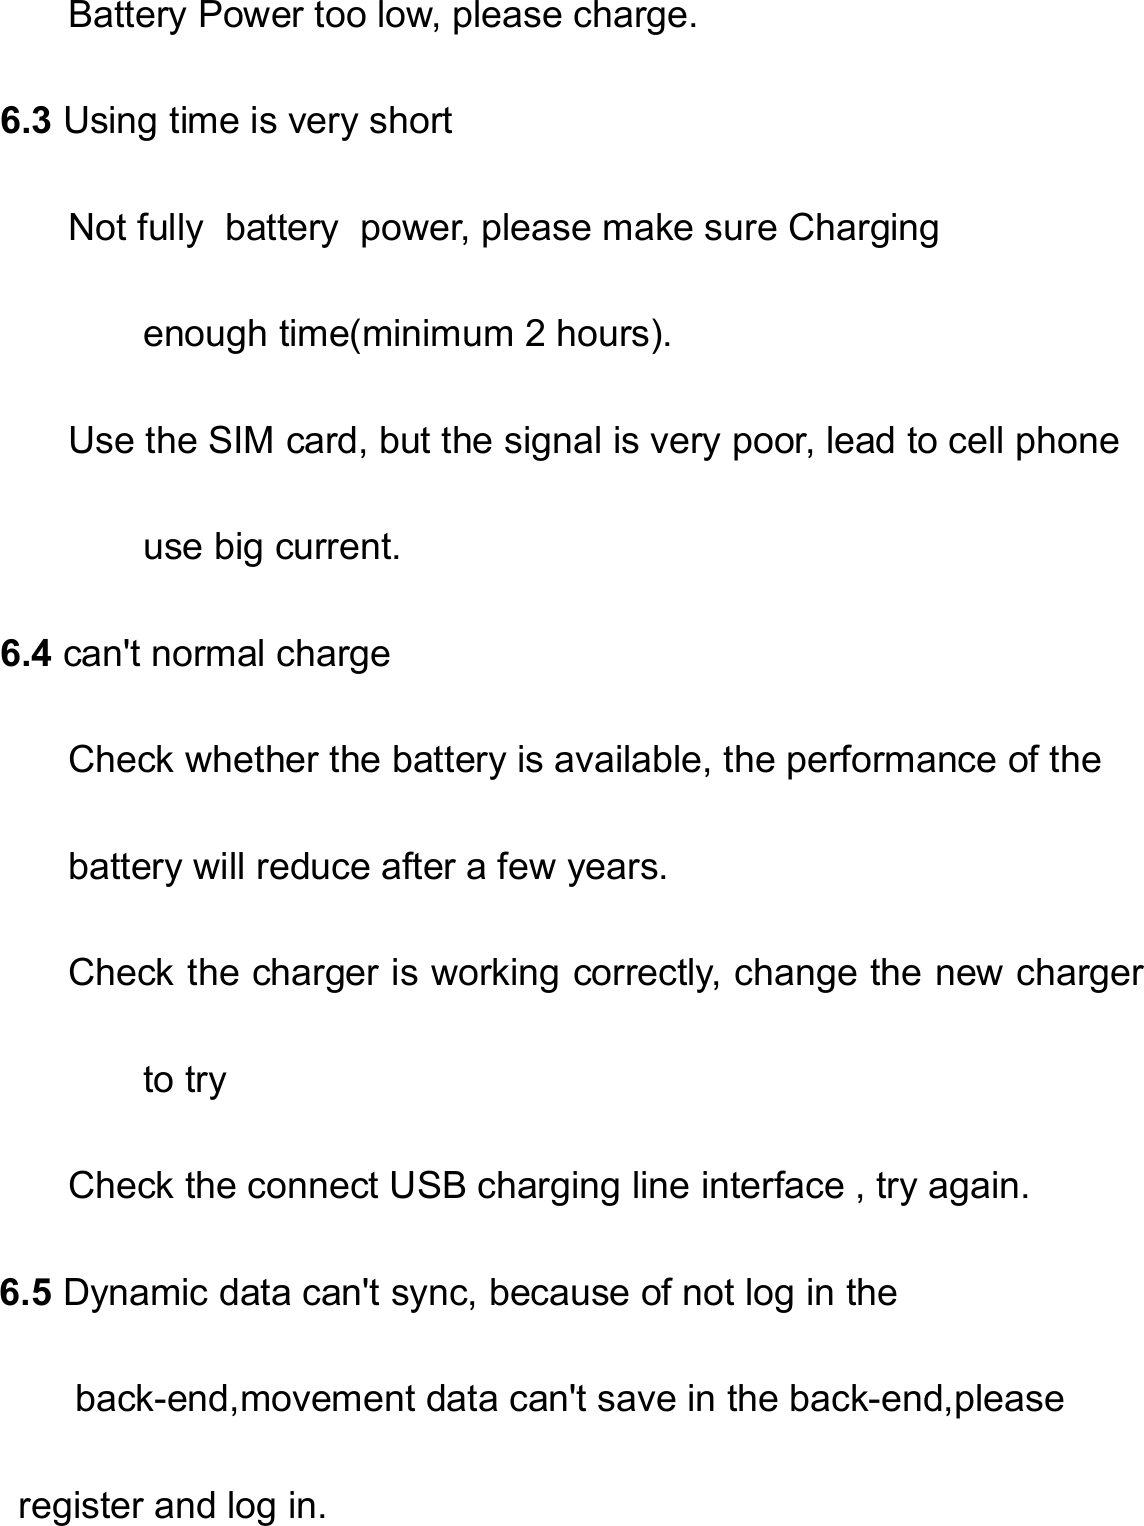   Battery Power too low, please charge.     6.3 Using time is very short Not fully  battery  power, please make sure Charging enough time(minimum 2 hours). Use the SIM card, but the signal is very poor, lead to cell phone use big current.     6.4 can&apos;t normal charge Check whether the battery is available, the performance of the   battery will reduce after a few years. Check the charger is working correctly, change the new charger to try Check the connect USB charging line interface , try again. 6.5 Dynamic data can&apos;t sync, because of not log in the           back-end,movement data can&apos;t save in the back-end,please   register and log in.  